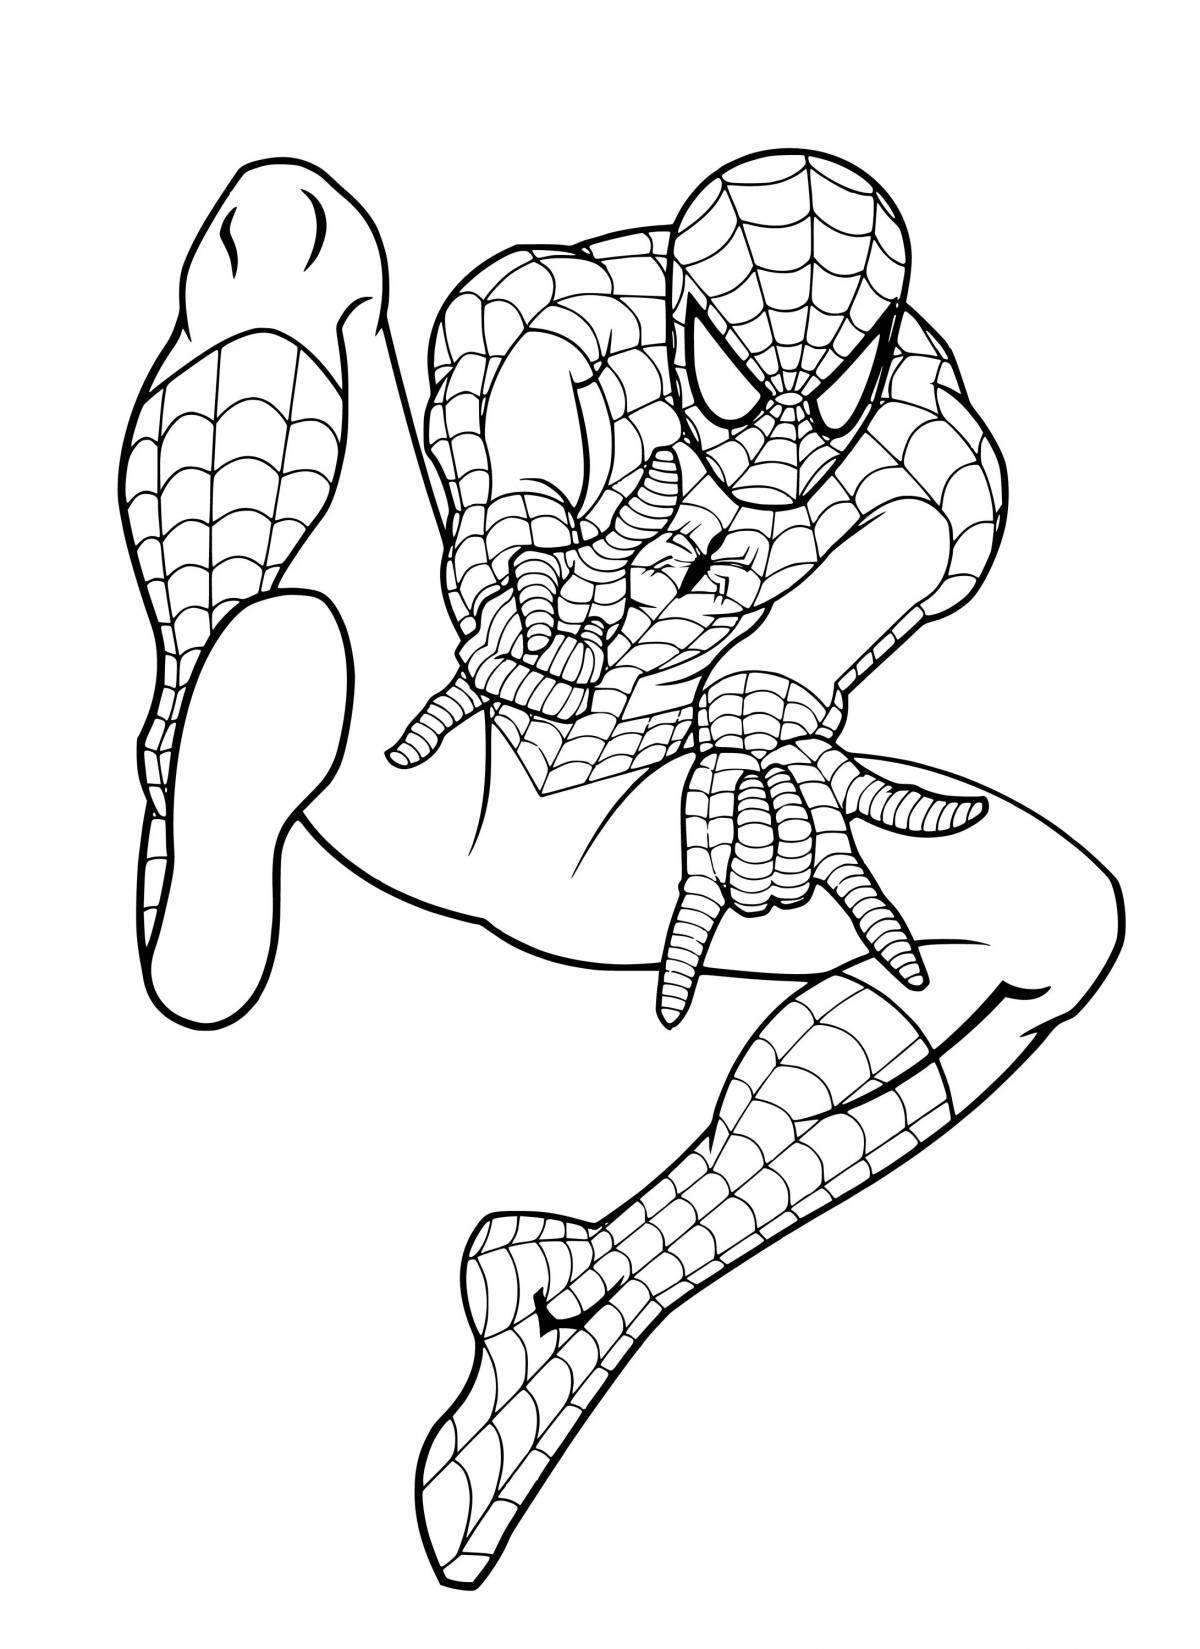 Spider-man coloring book for kids 3-4 years old